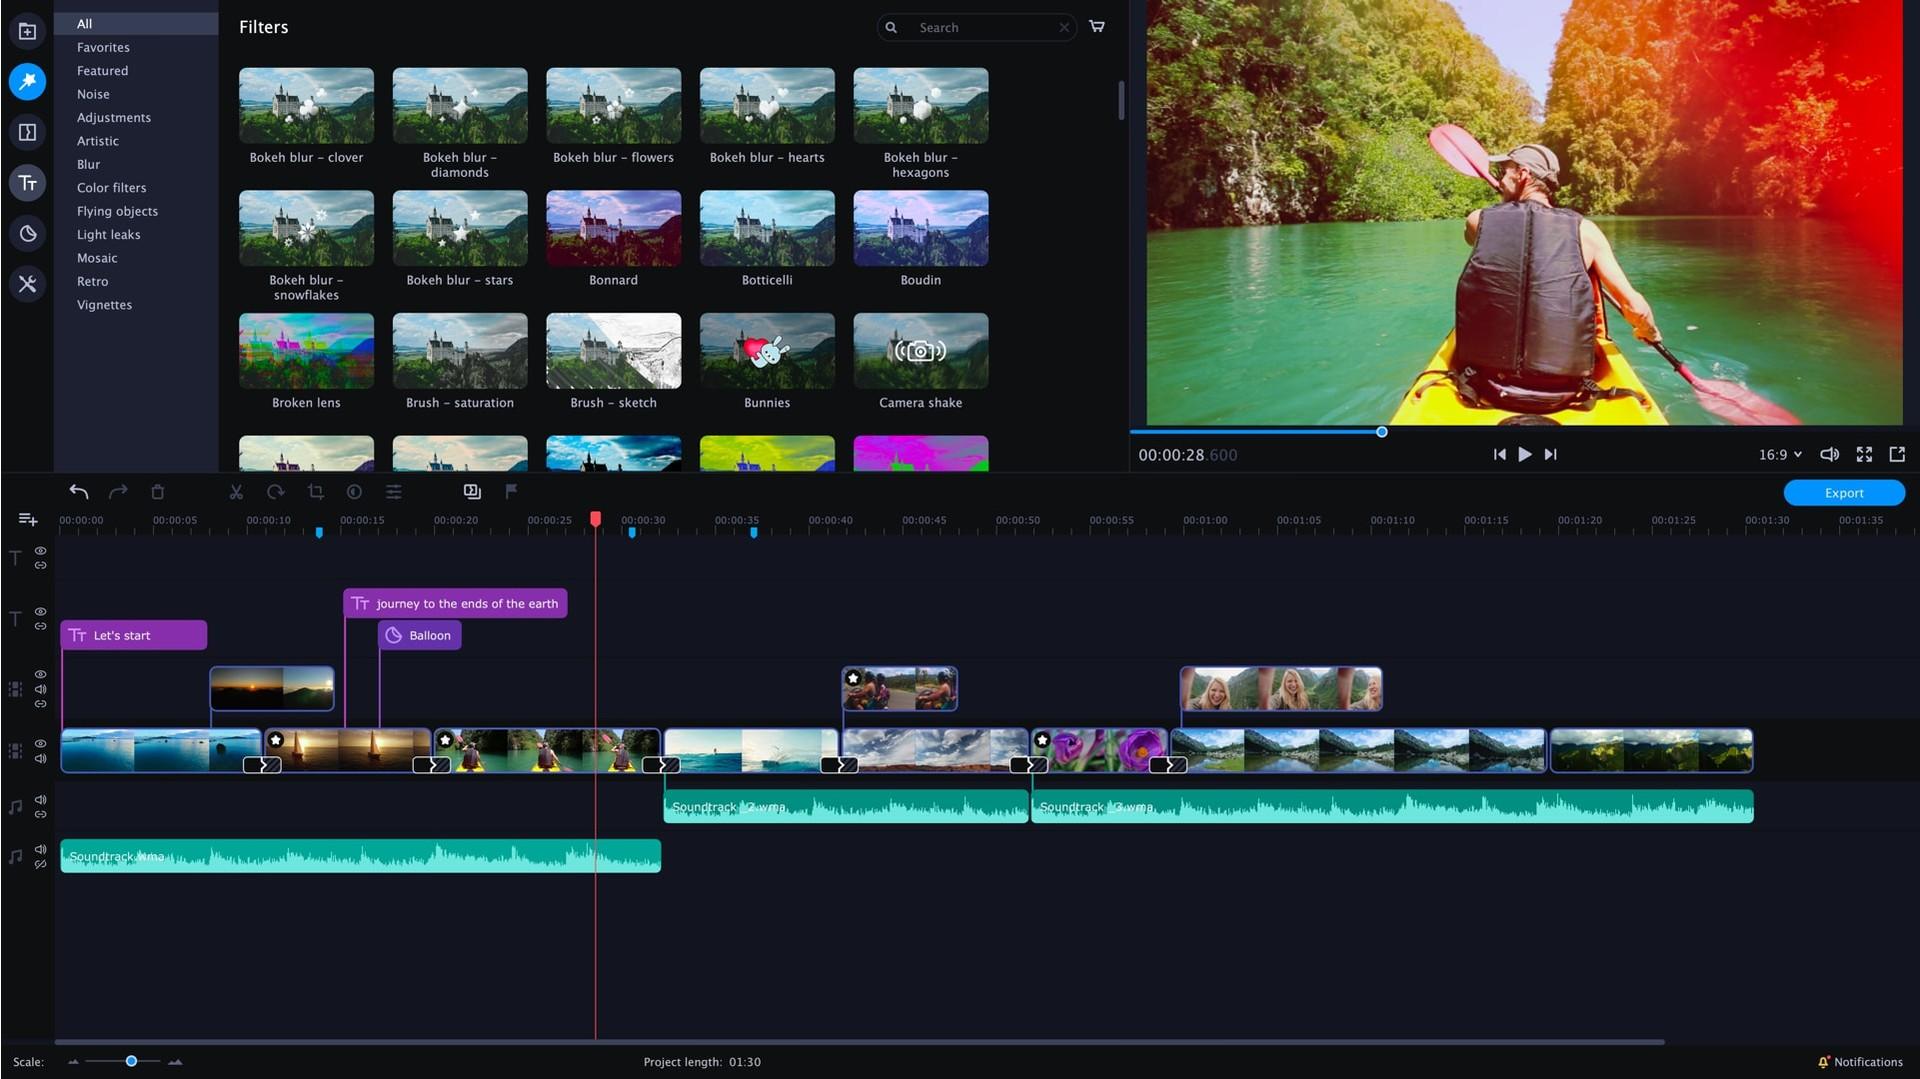 Screenshot №1 from game Movavi Video Editor Plus 2020 - Video Editing Software